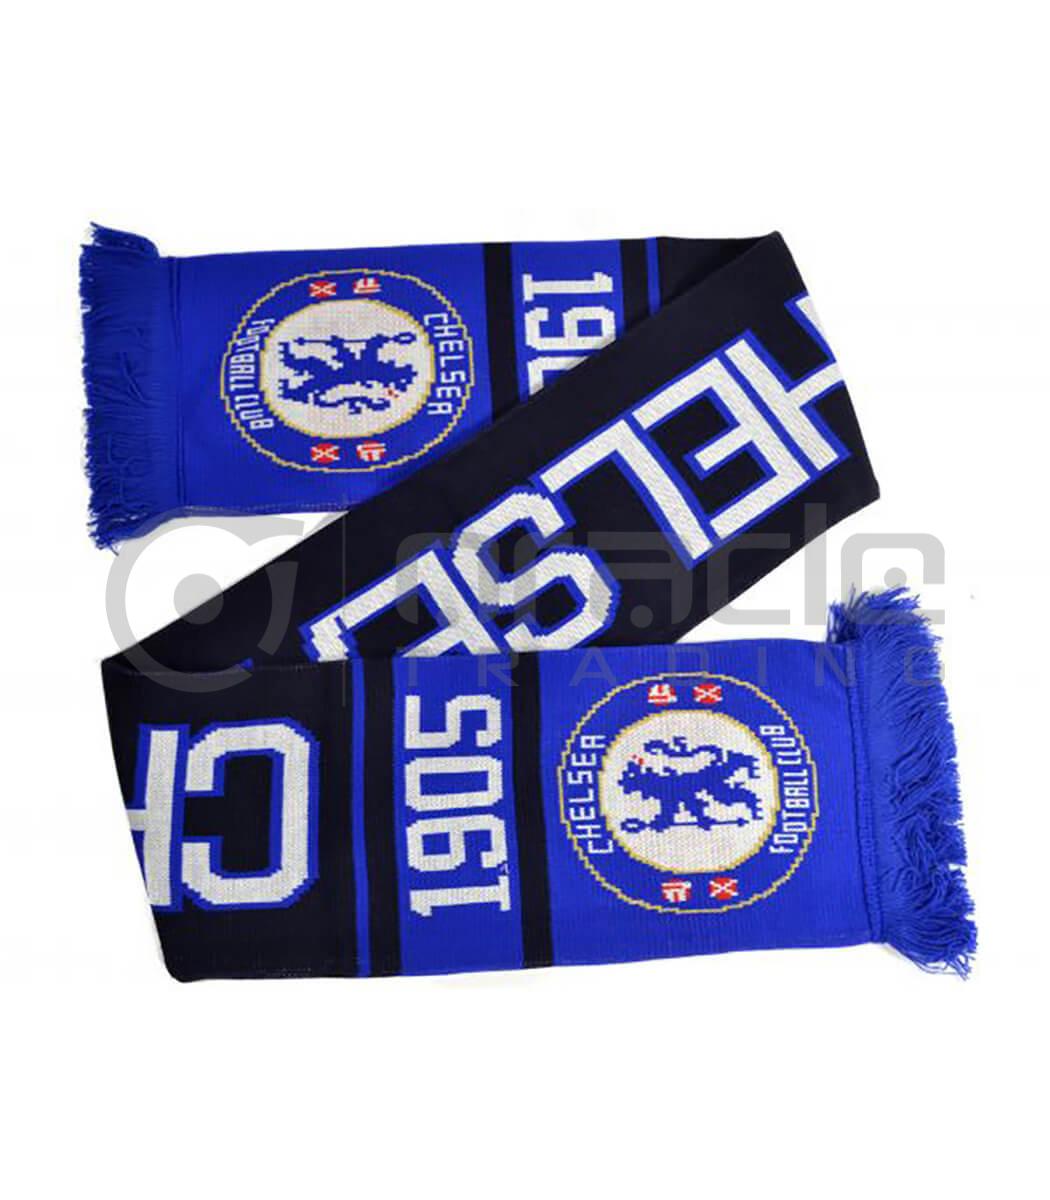 Chelsea Knitted Scarf - UK Made